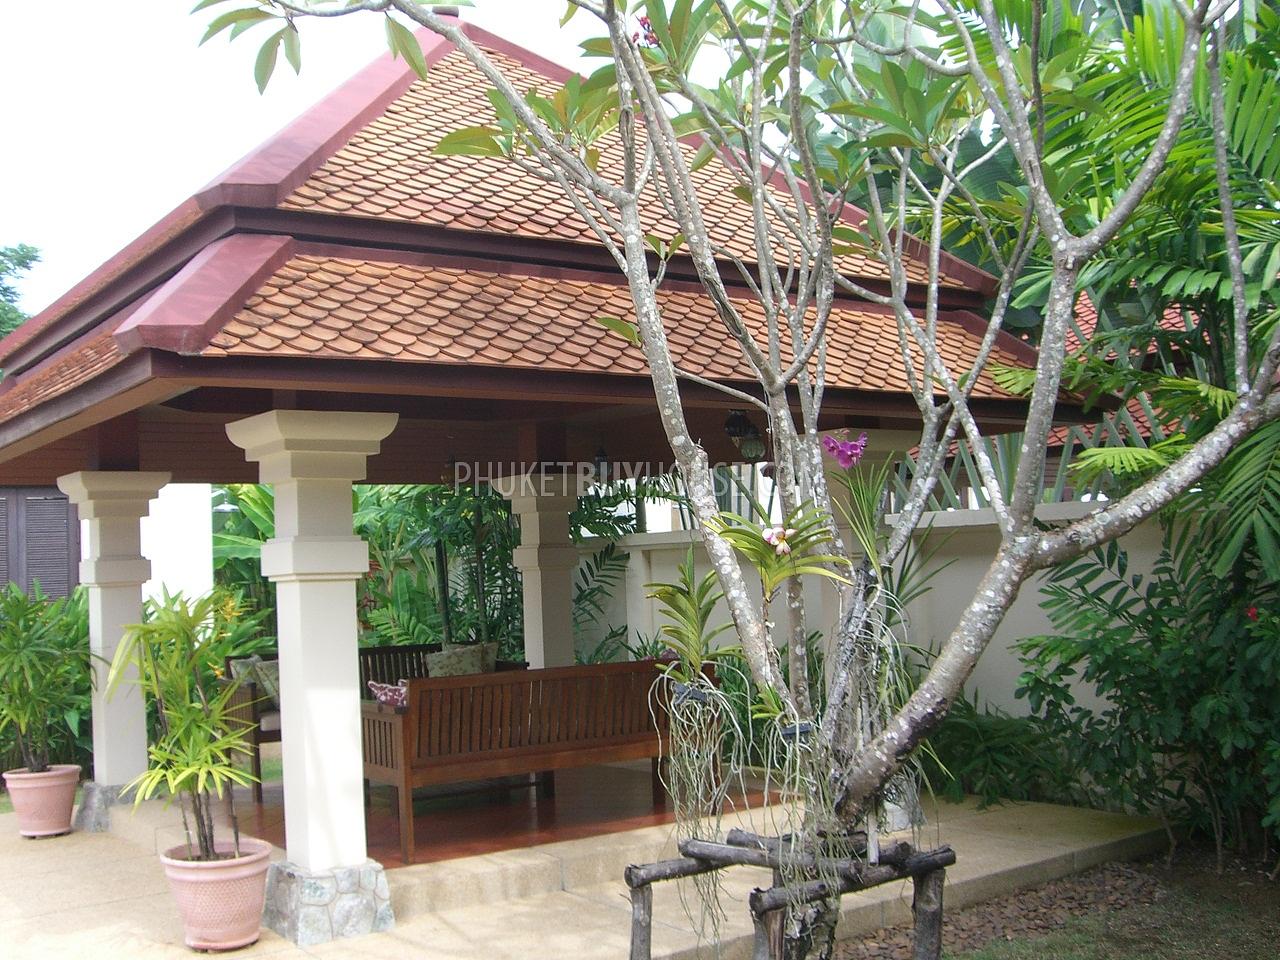 BAN1211: Villa with overlooks the Pool and exquisite Thai garden. Photo #7